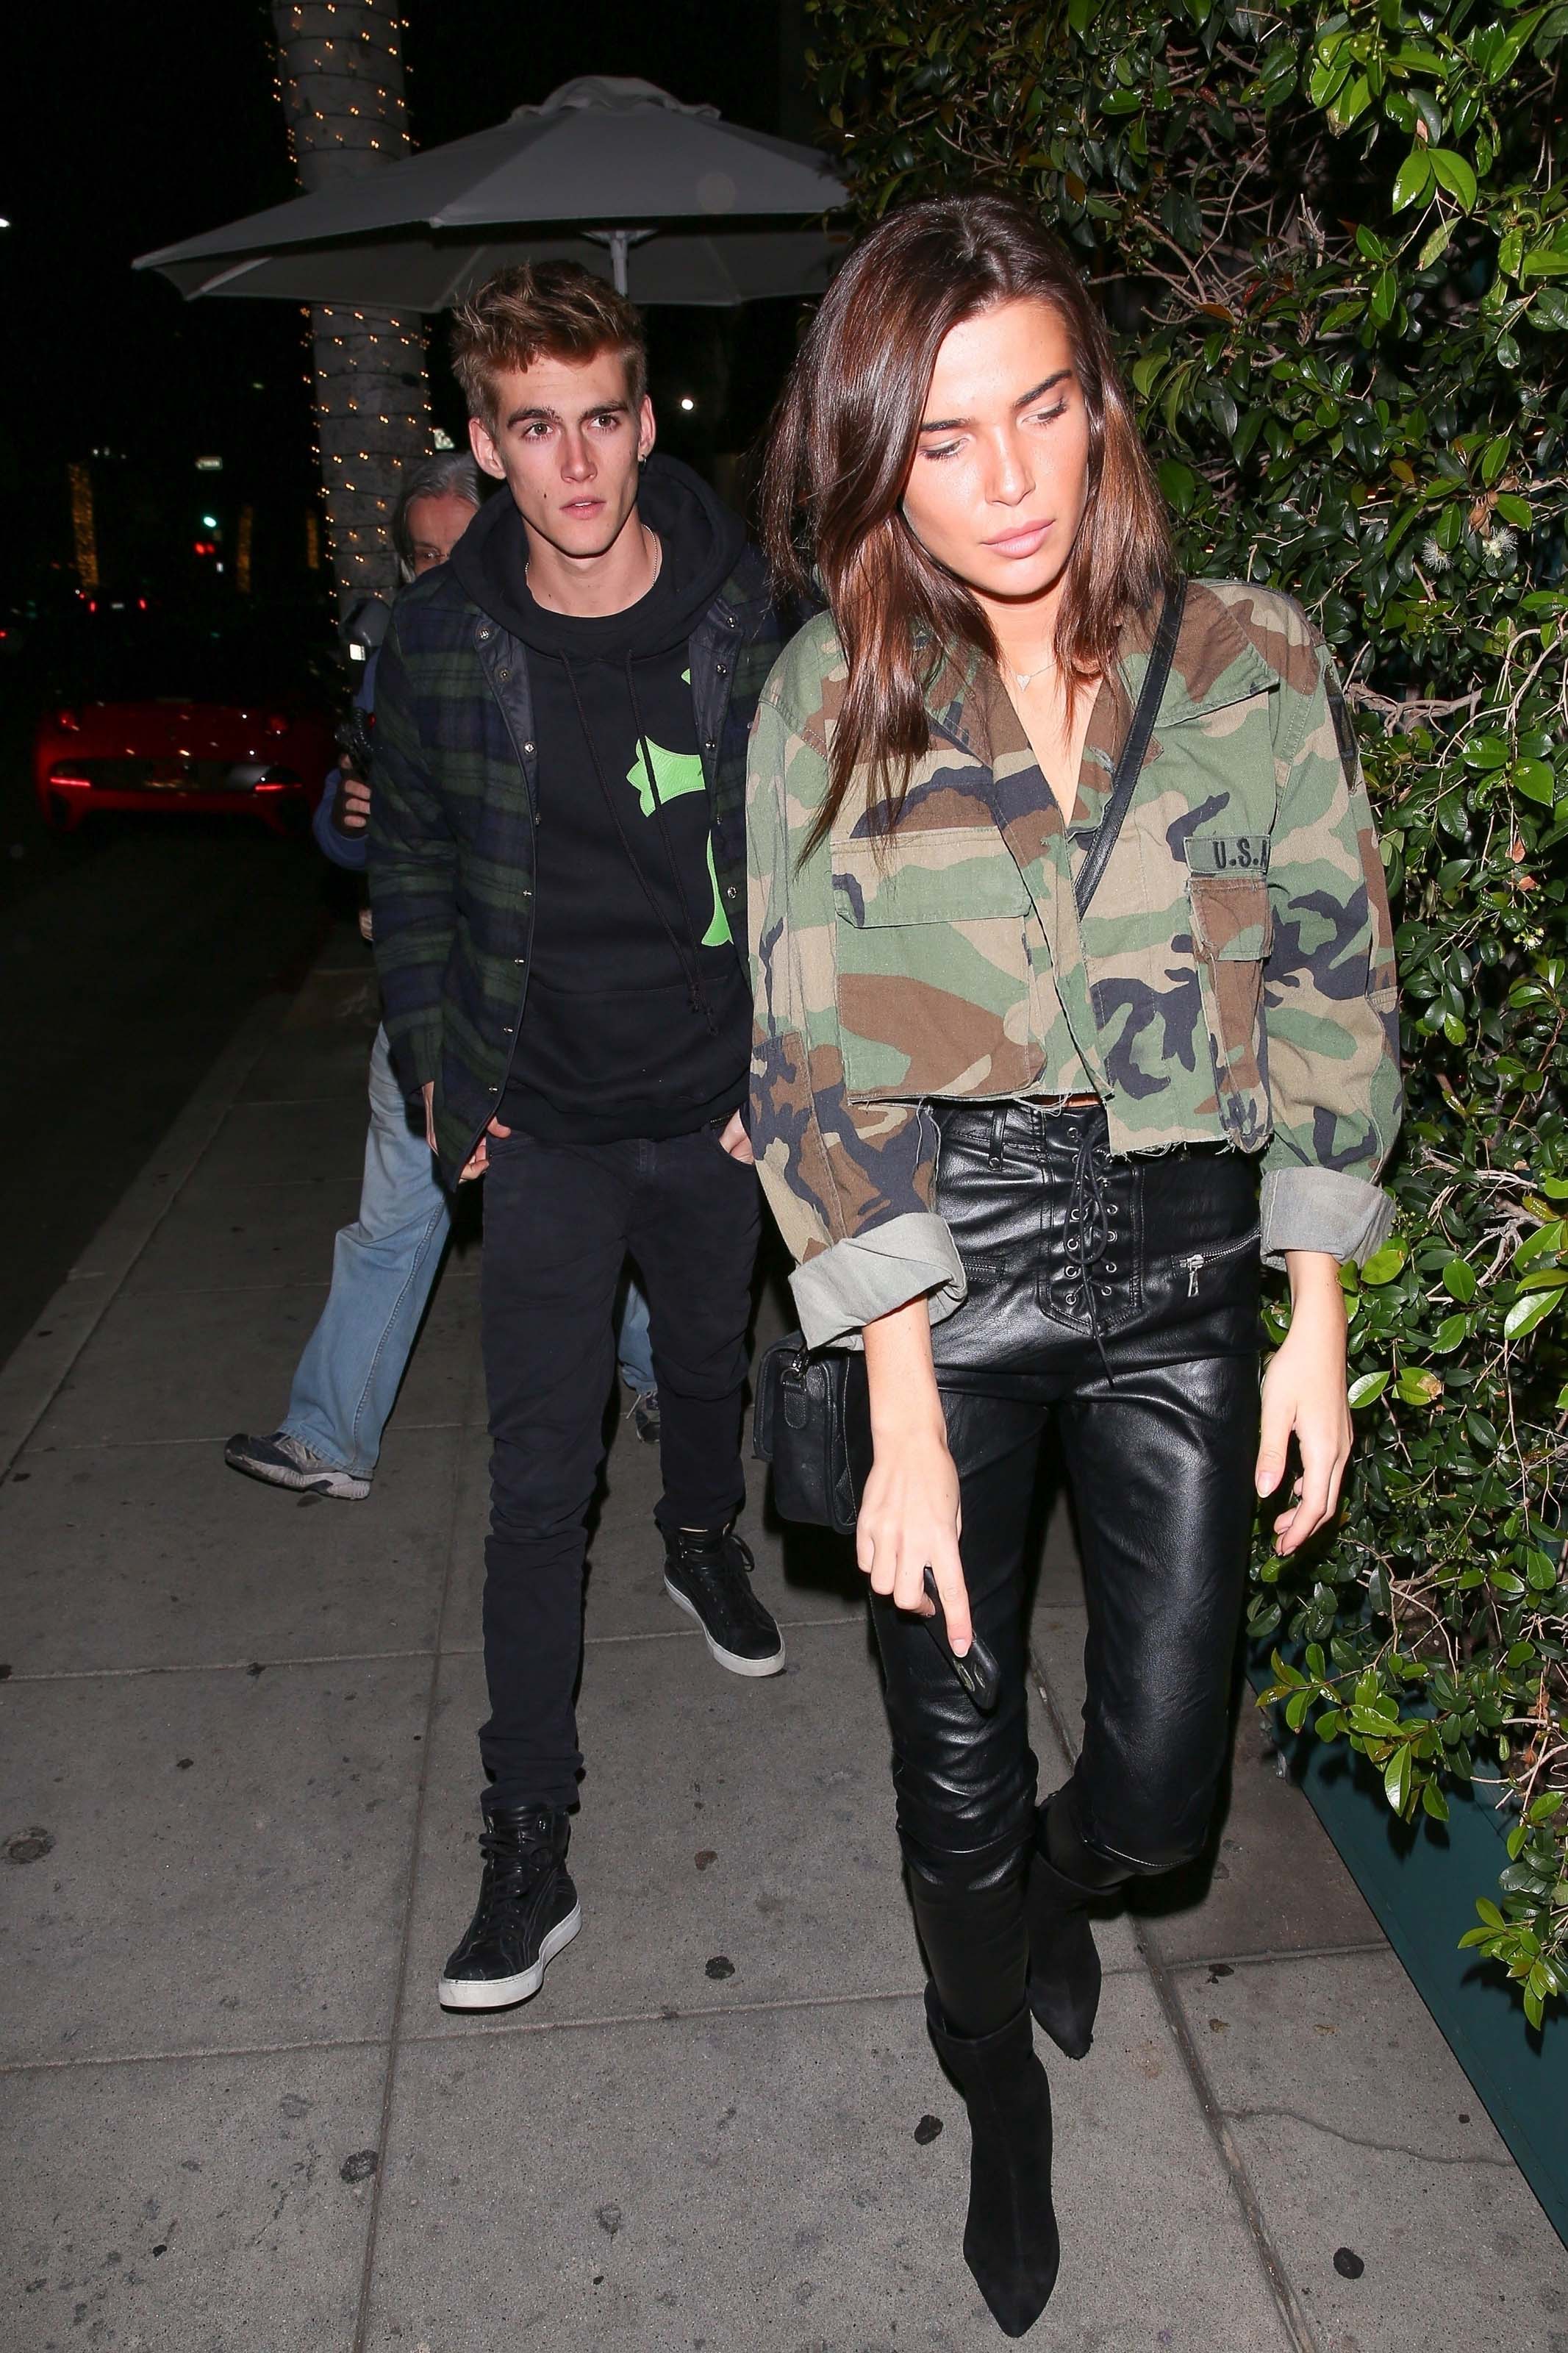 Cayley King at Mr. Chow for Madison Beer’s birthday dinner